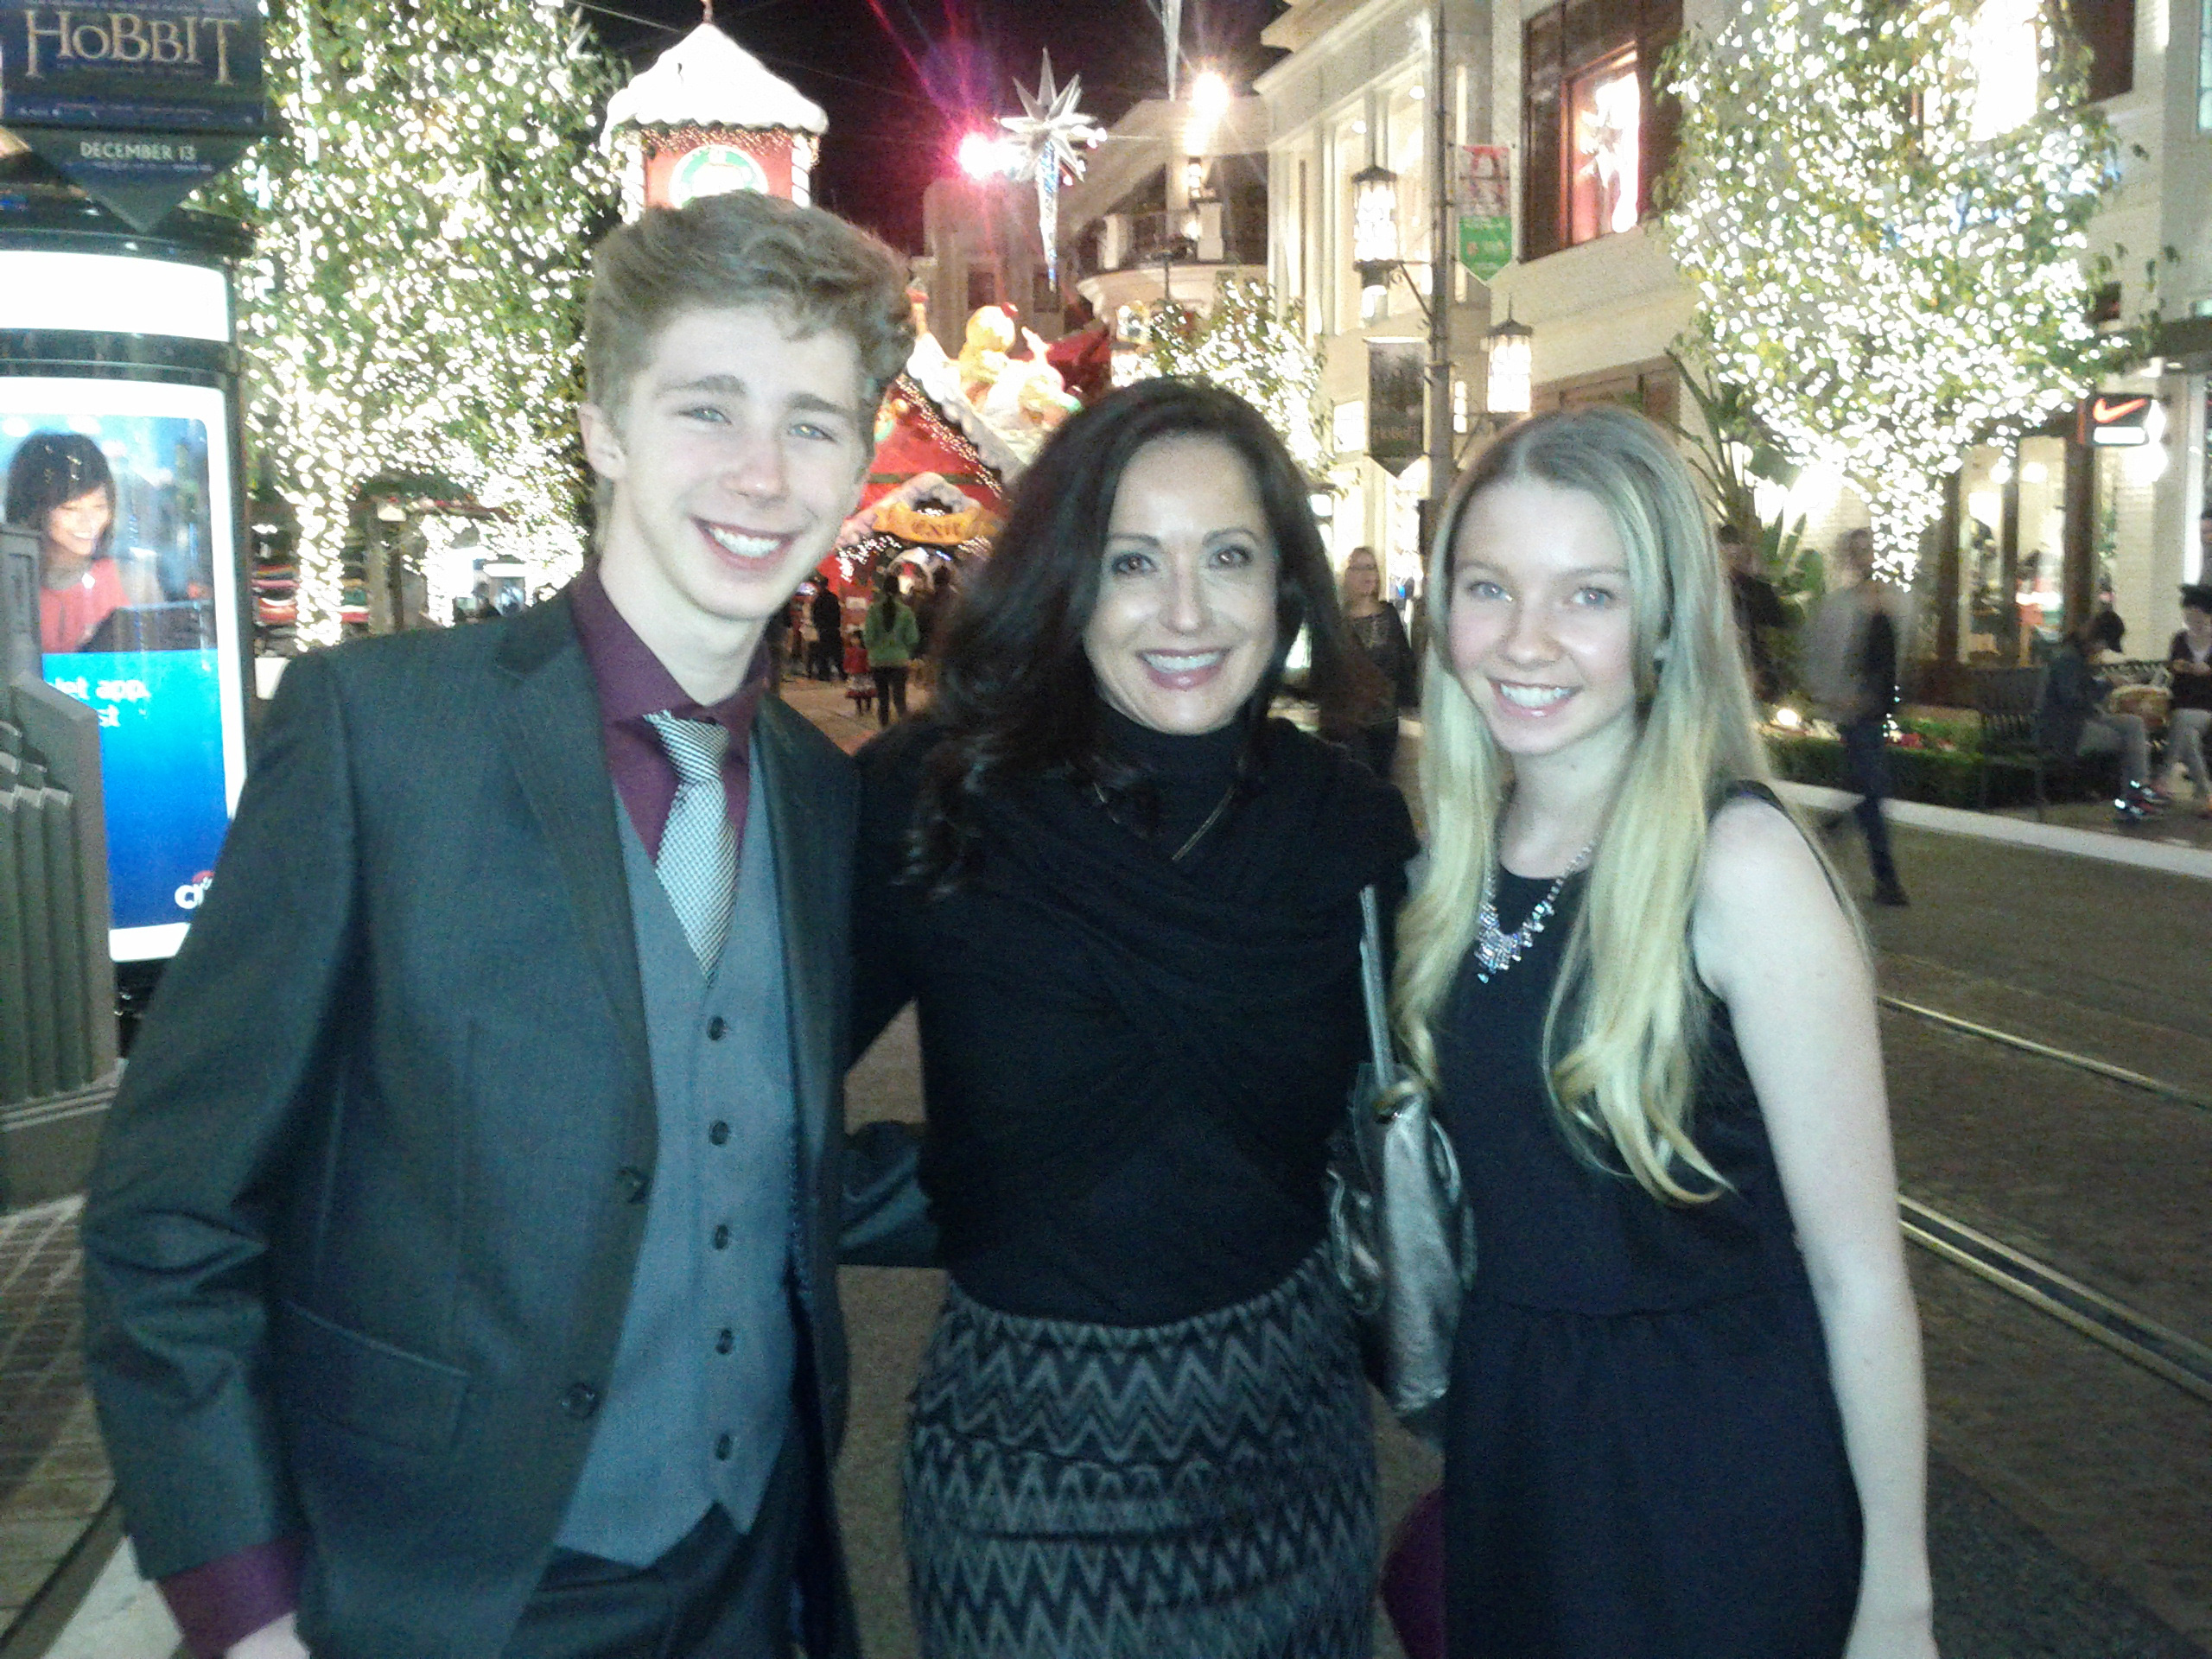 Elise Luthman and Joey Luthman with their manager, Linda Henrie of Go Talent Management at the premiere of CH:OS:EN Season 2, Dec.3, 2013